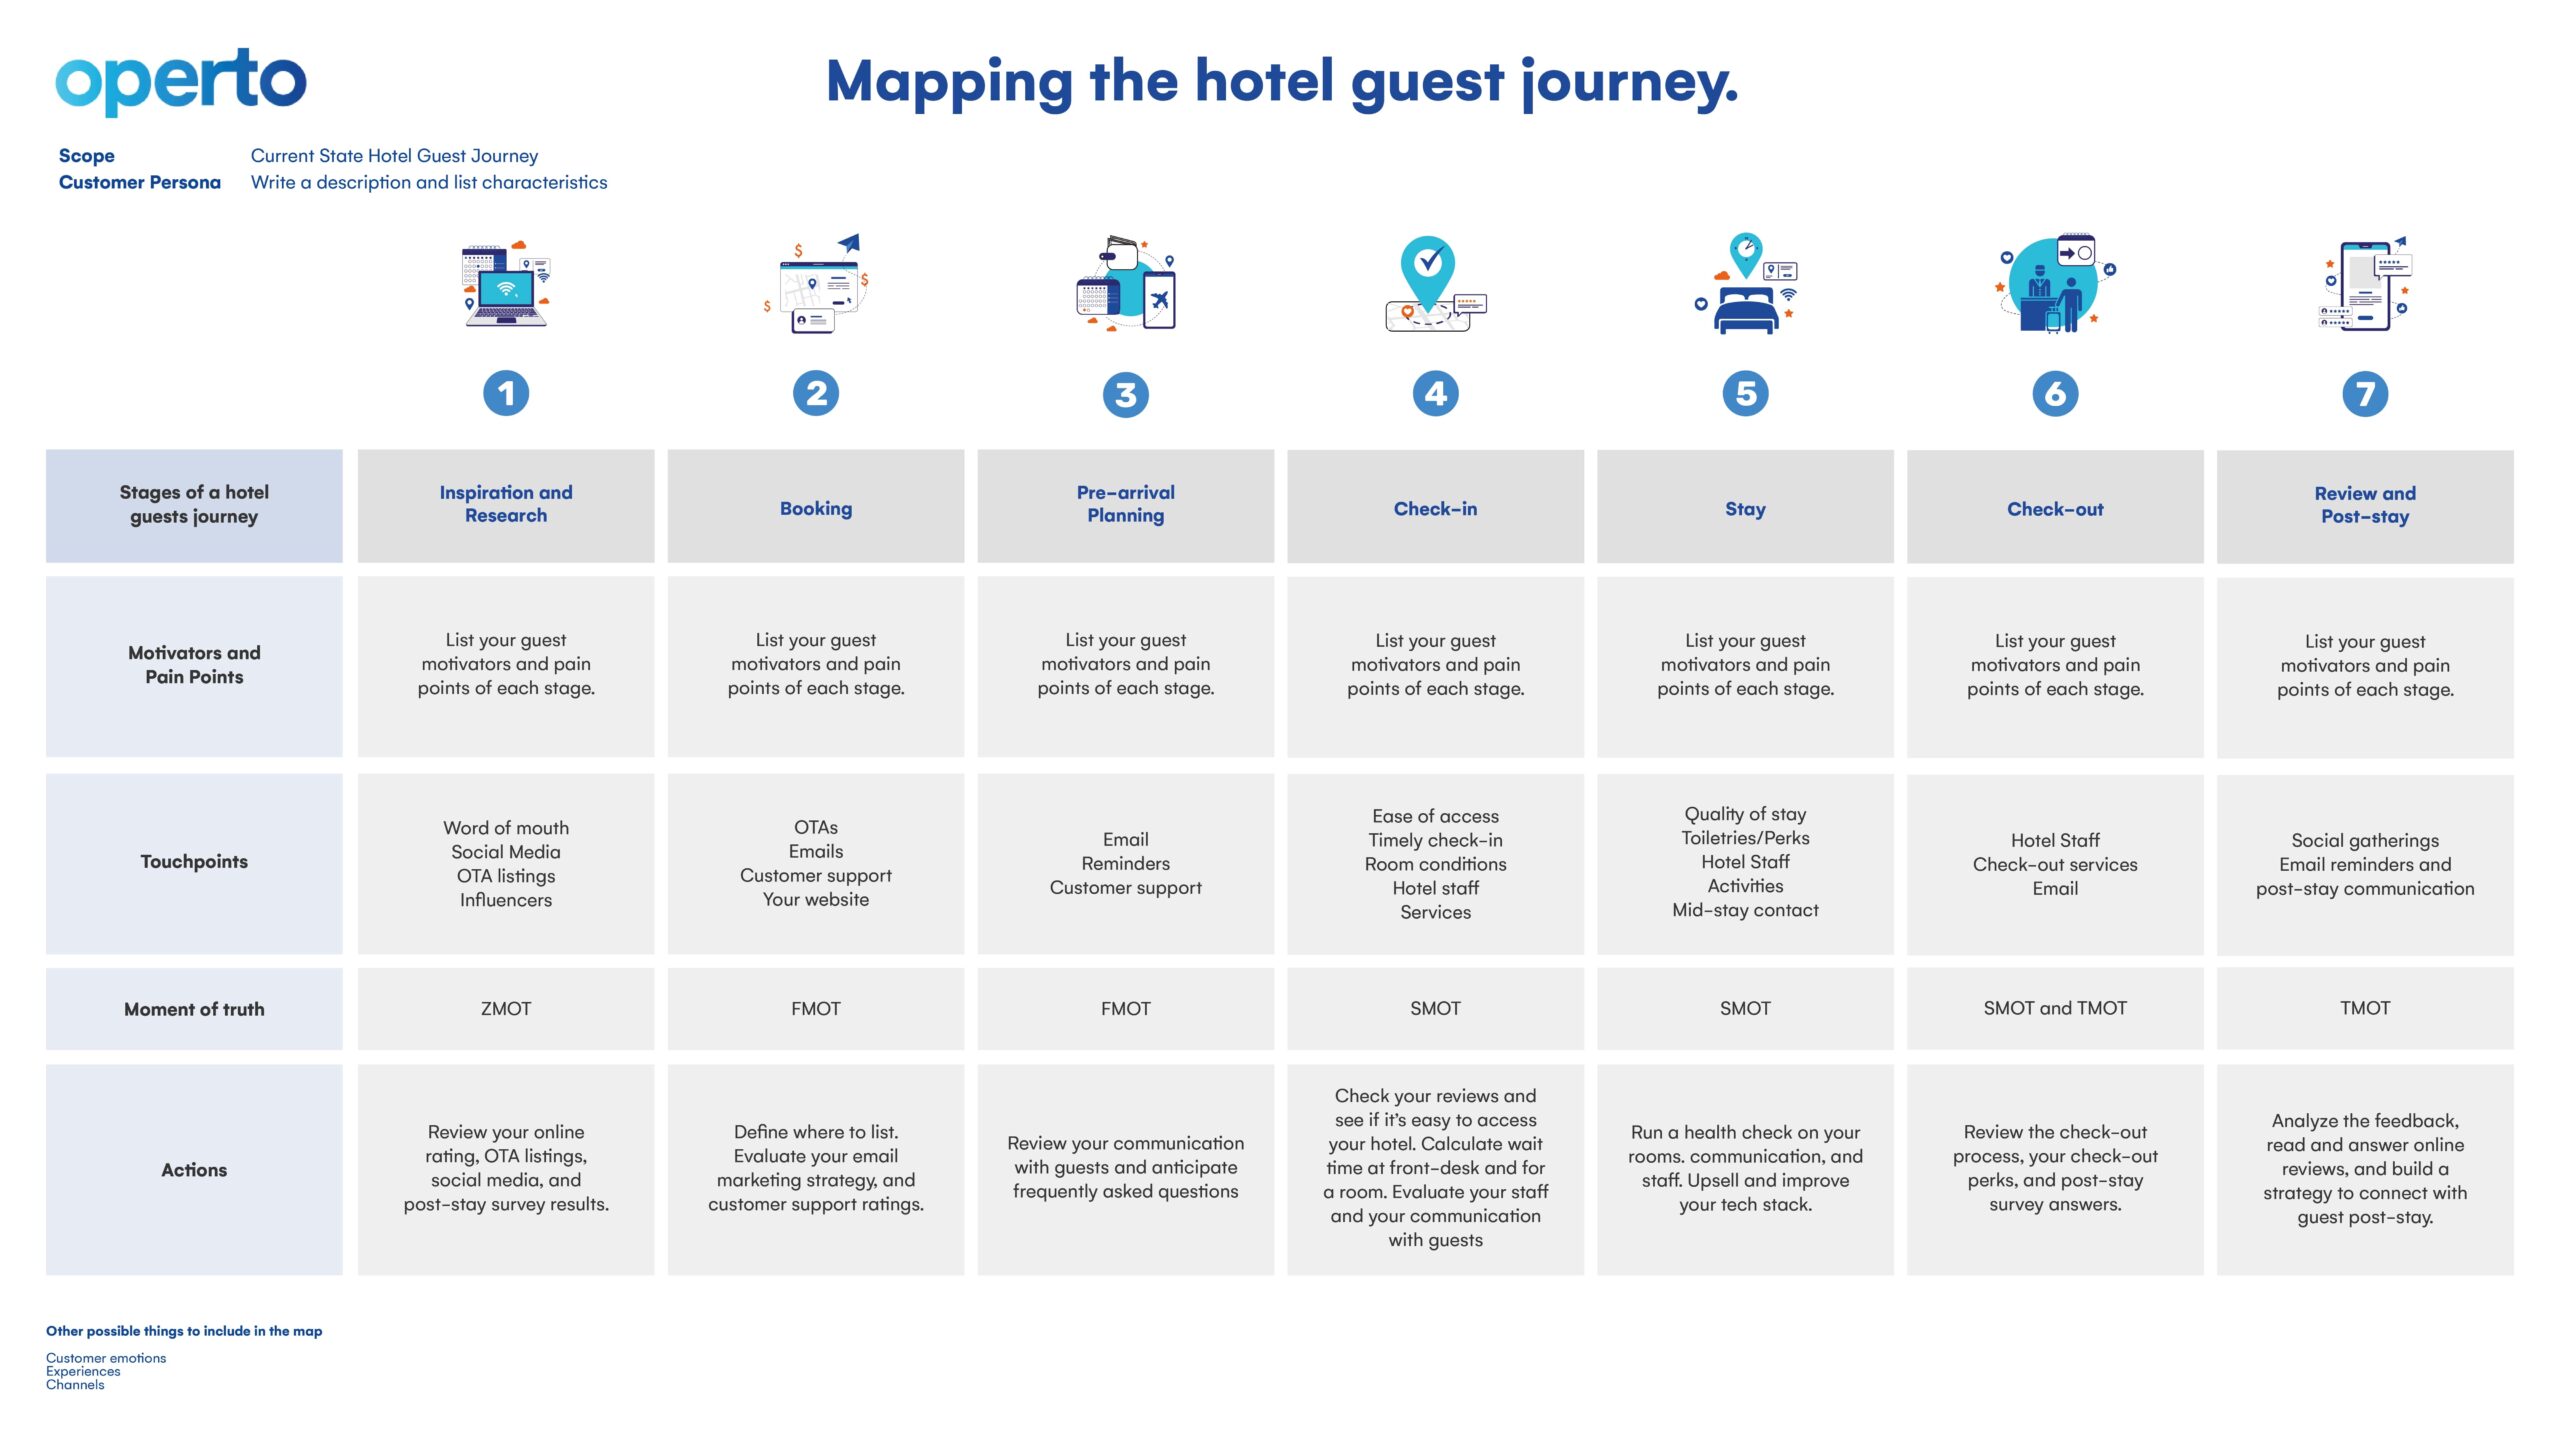 Visual representation of the seven stages of the hotel guest journey